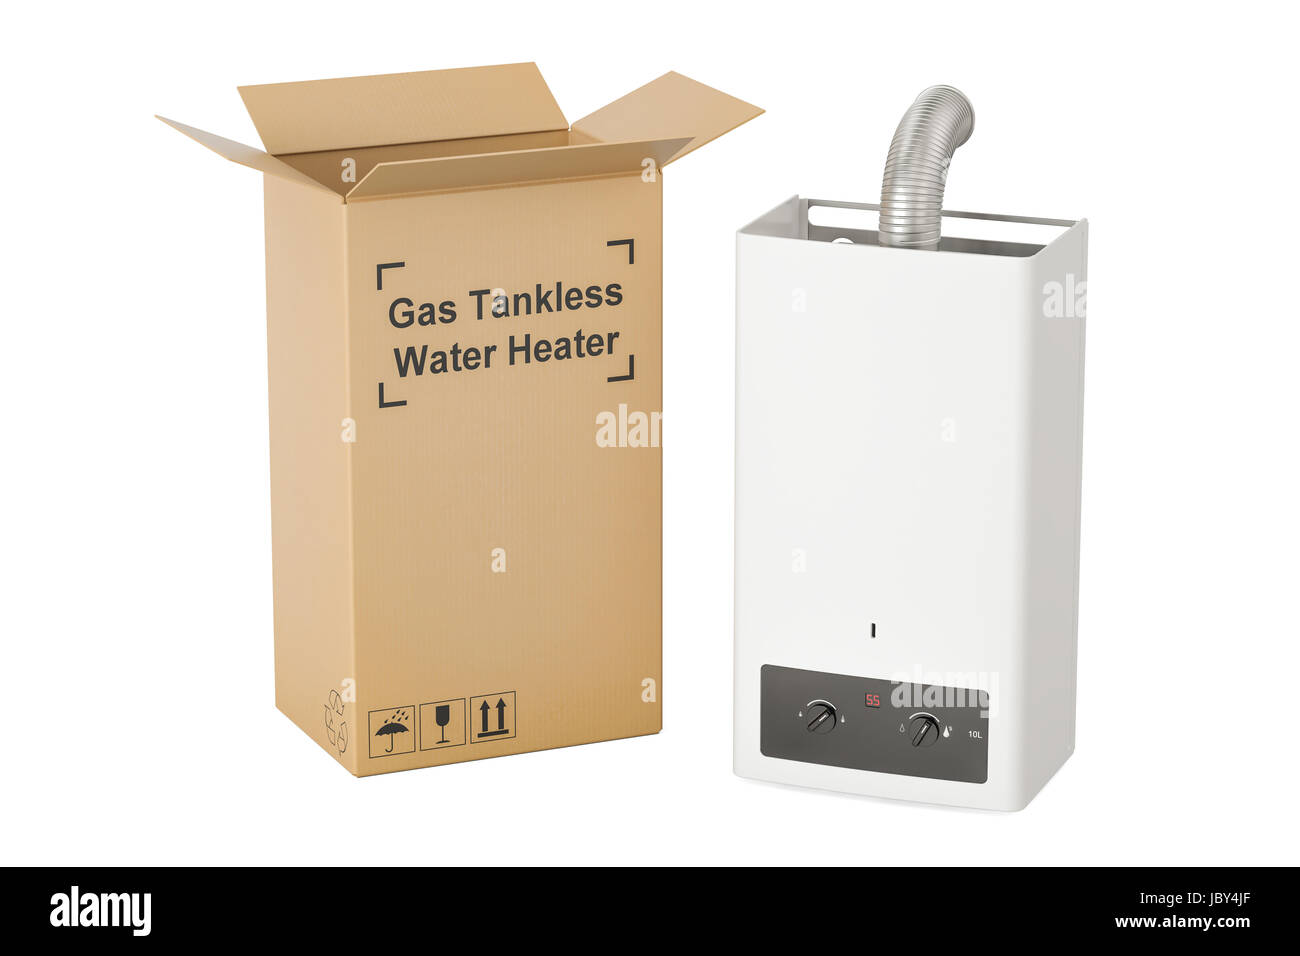 Gas tankless water heater with cardboard box, delivery concept. 3D rendering Stock Photo